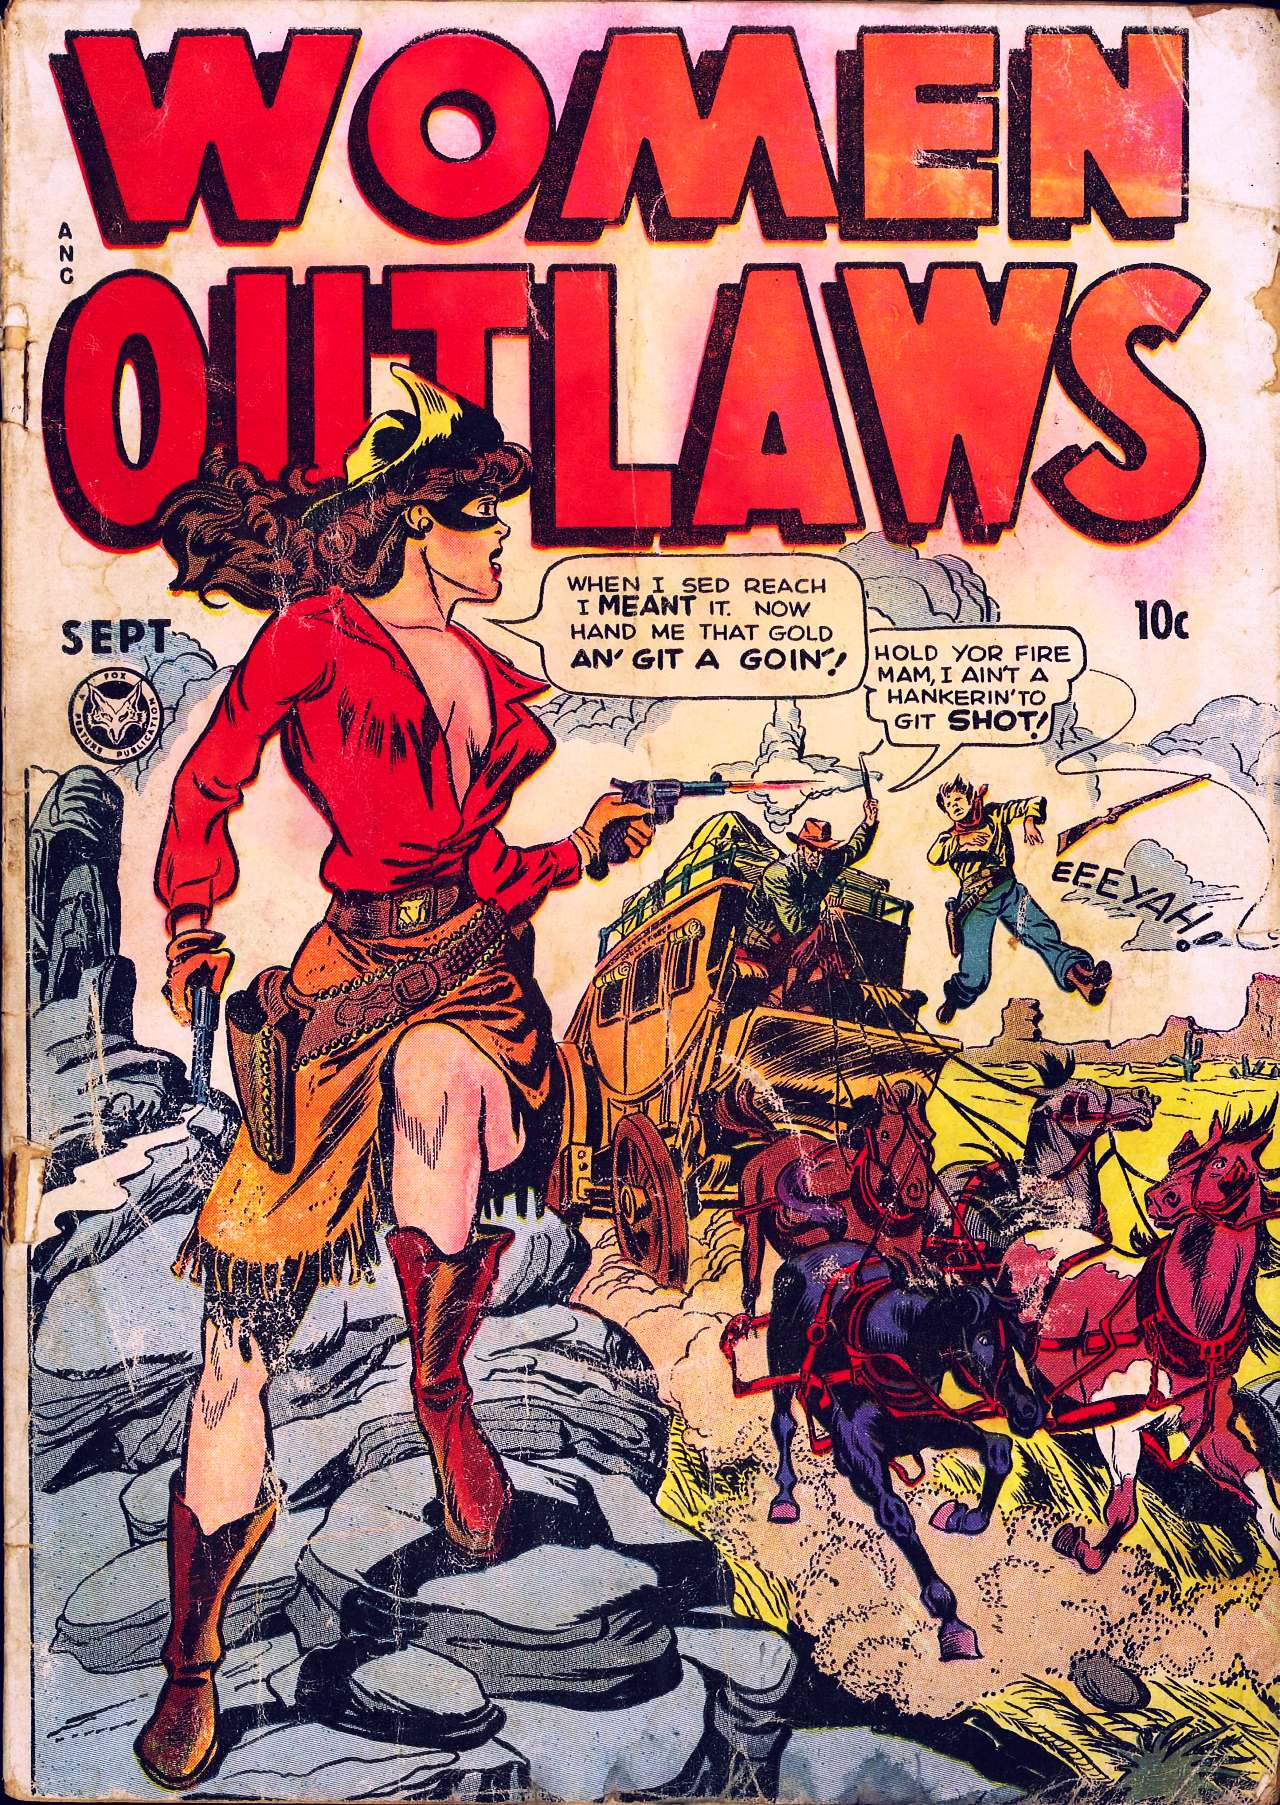 cover of women outlaws #2